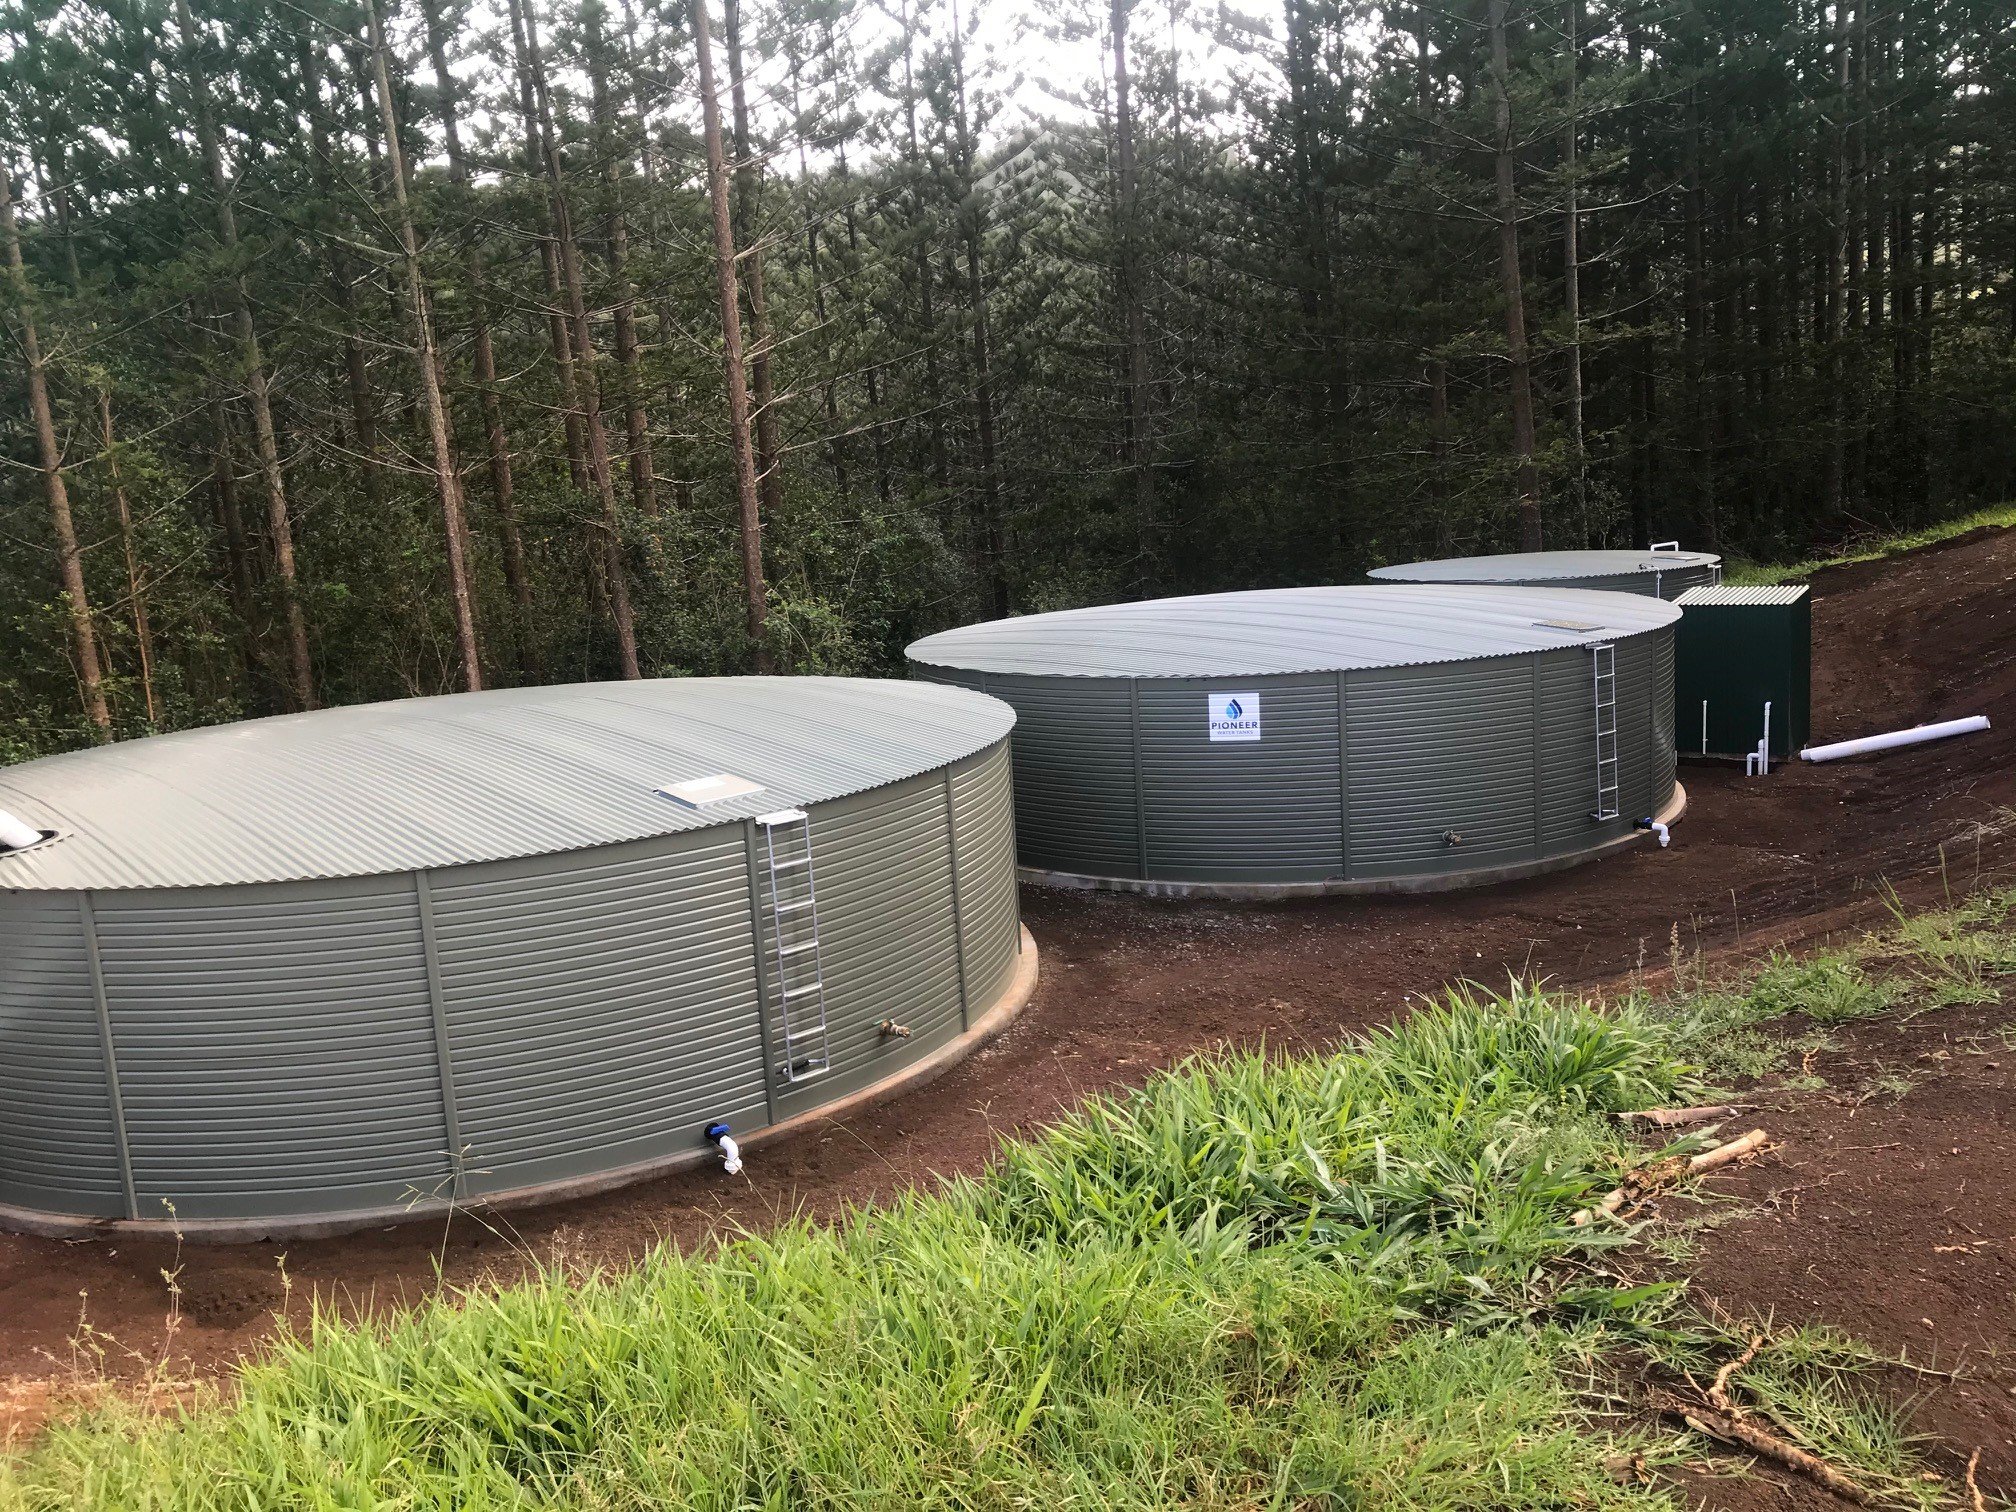 New water tanks plumbed to the existing buildings and the new shade house complex